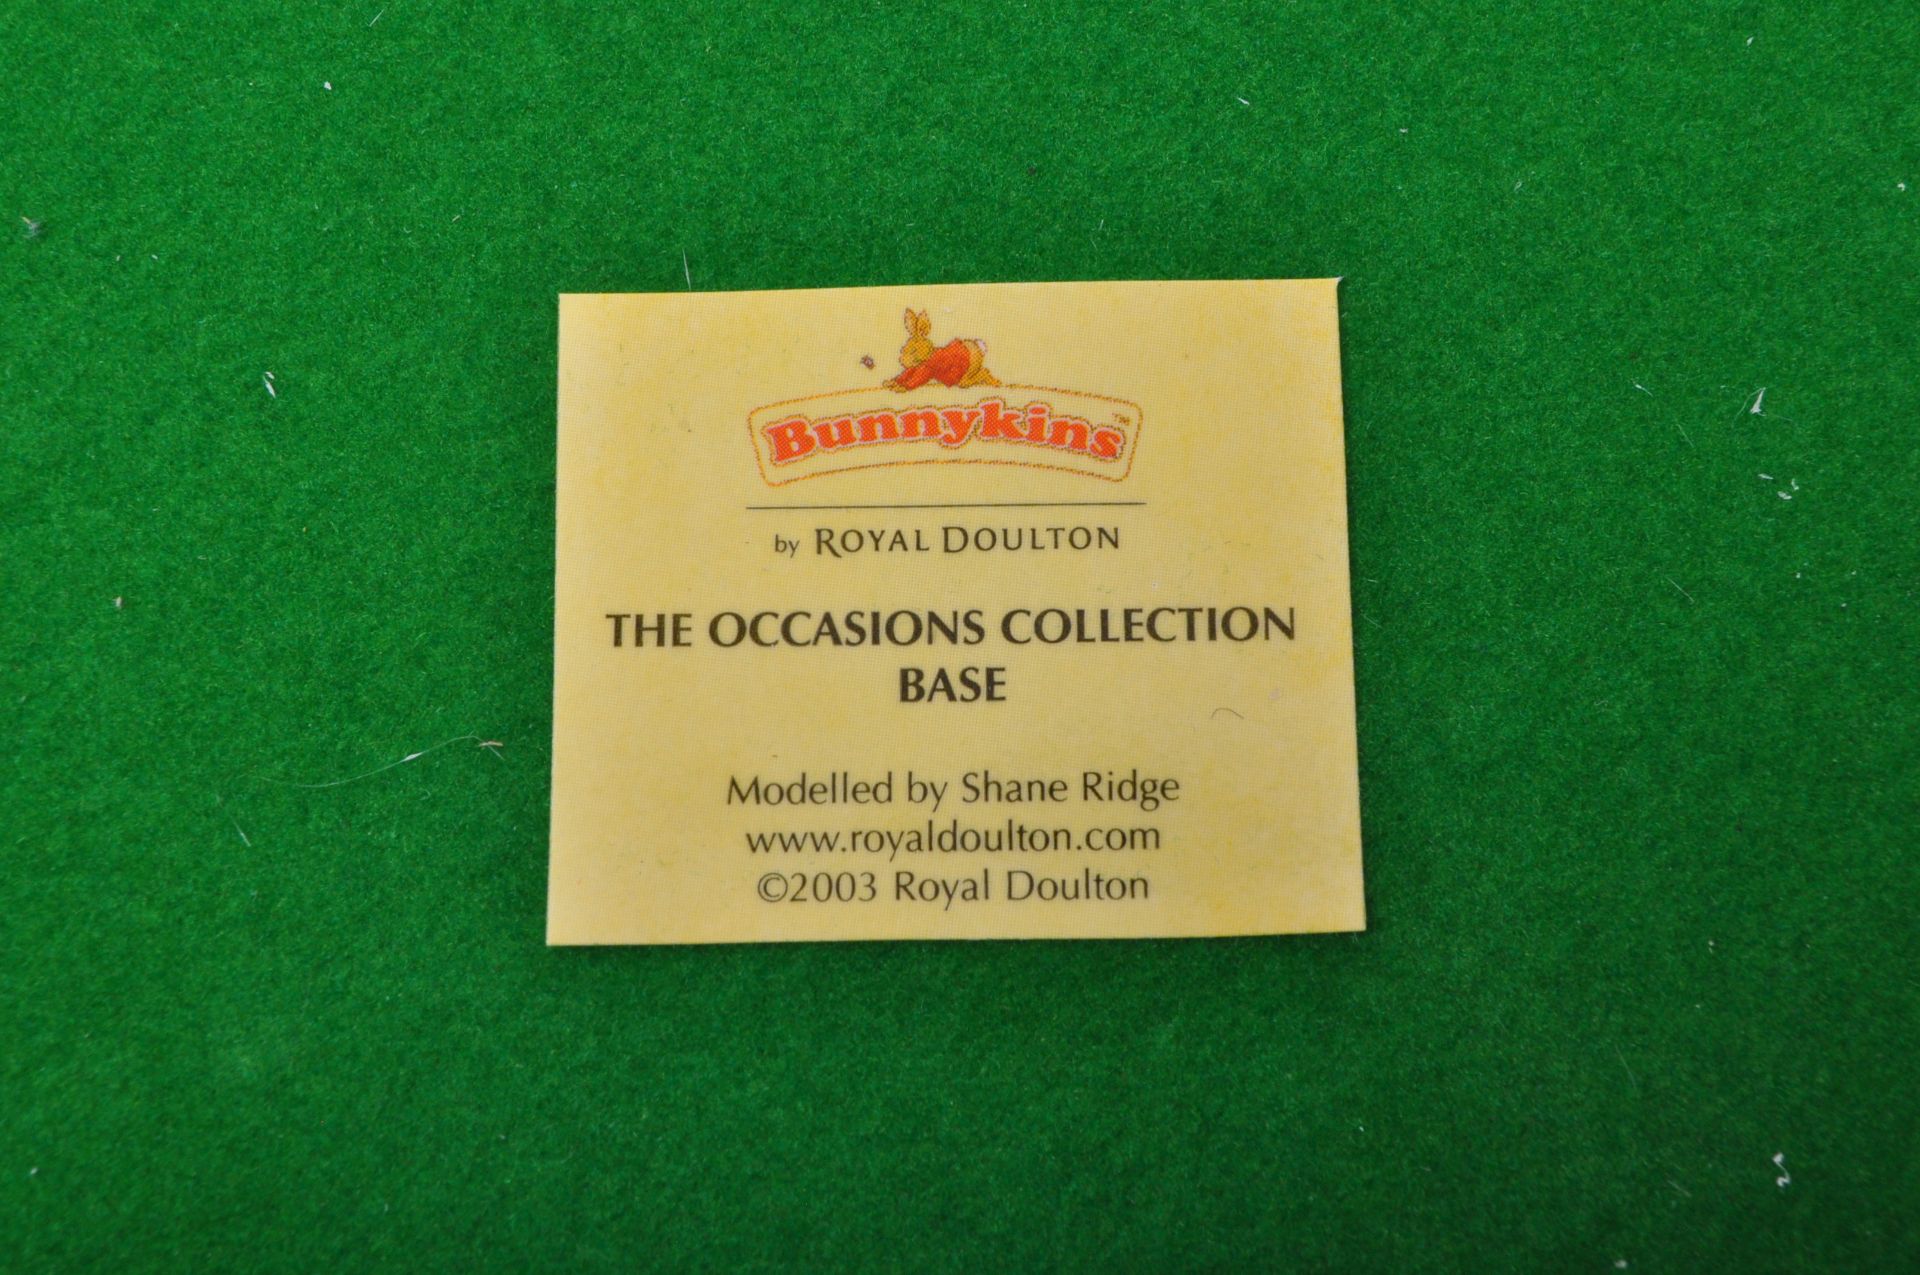 COLLECTION OF NOS ROYAL DOULTON BUNNYKINS FIGURES - Image 4 of 5